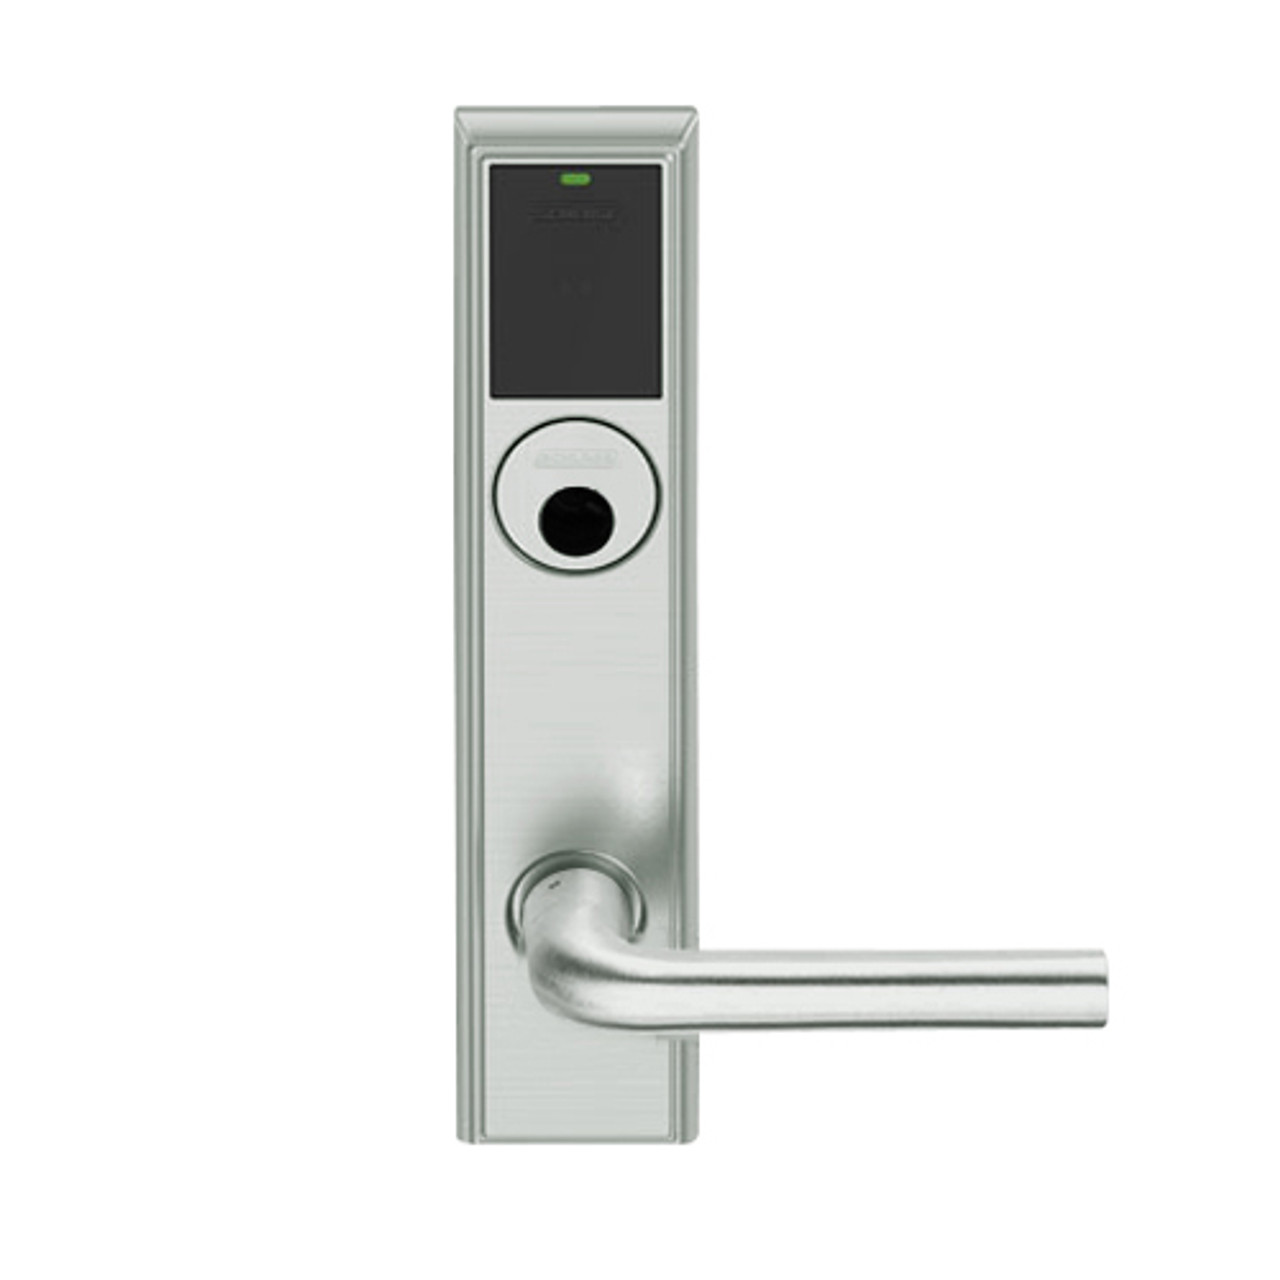 LEMB-ADD-L-02-619 Schlage Less Mortise Cylinder Privacy/Office Wireless Addison Mortise Lock with Push Button, LED and 02 Lever in Satin Nickel